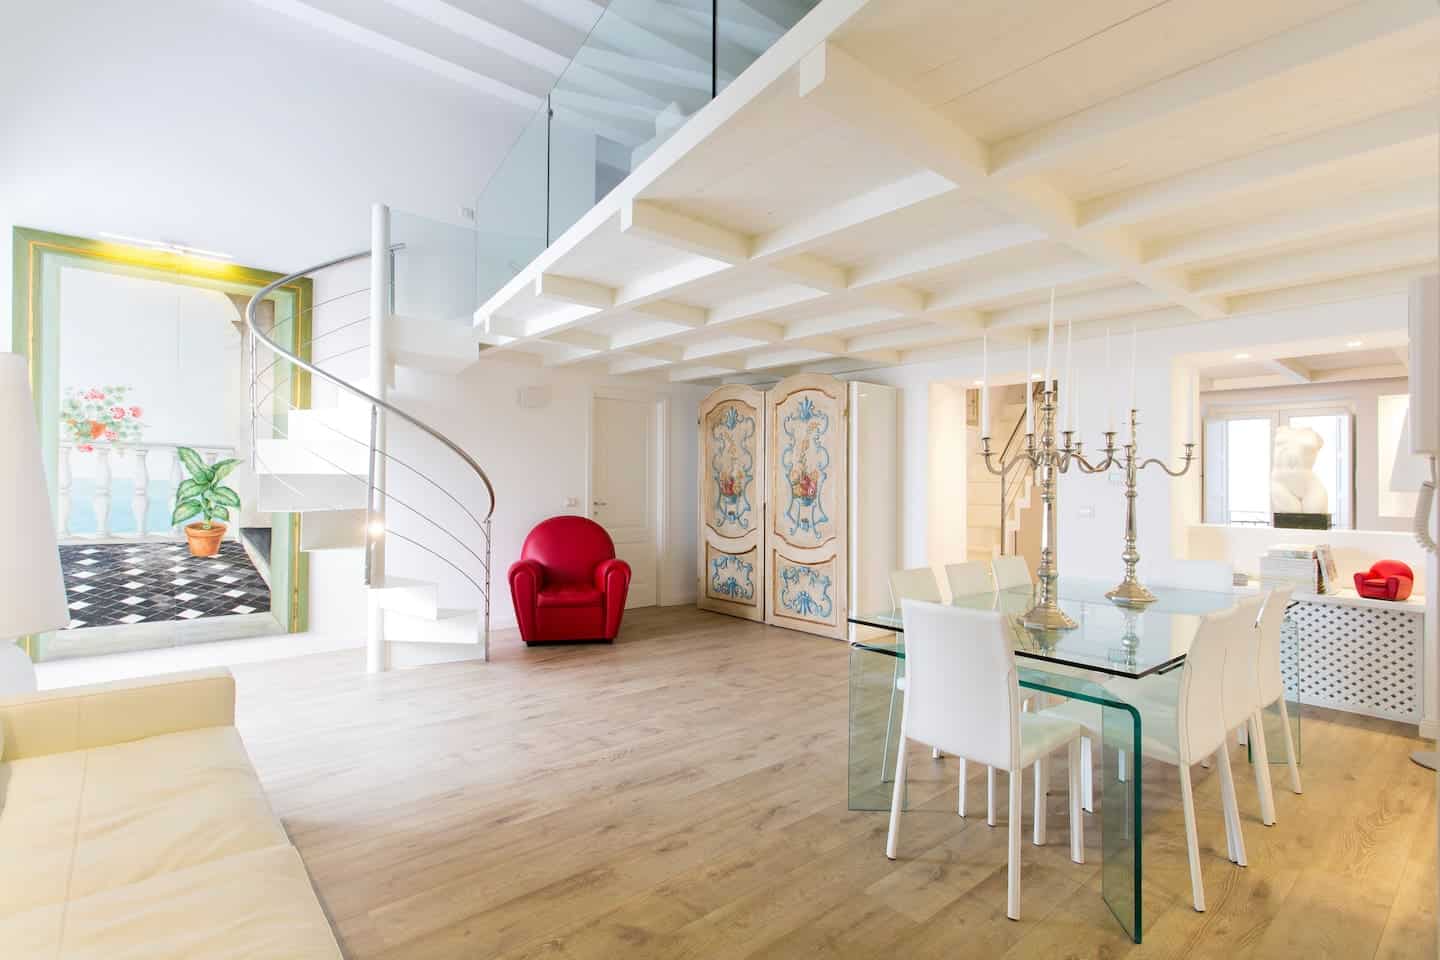 Image of Airbnb rental in Palermo, Italy